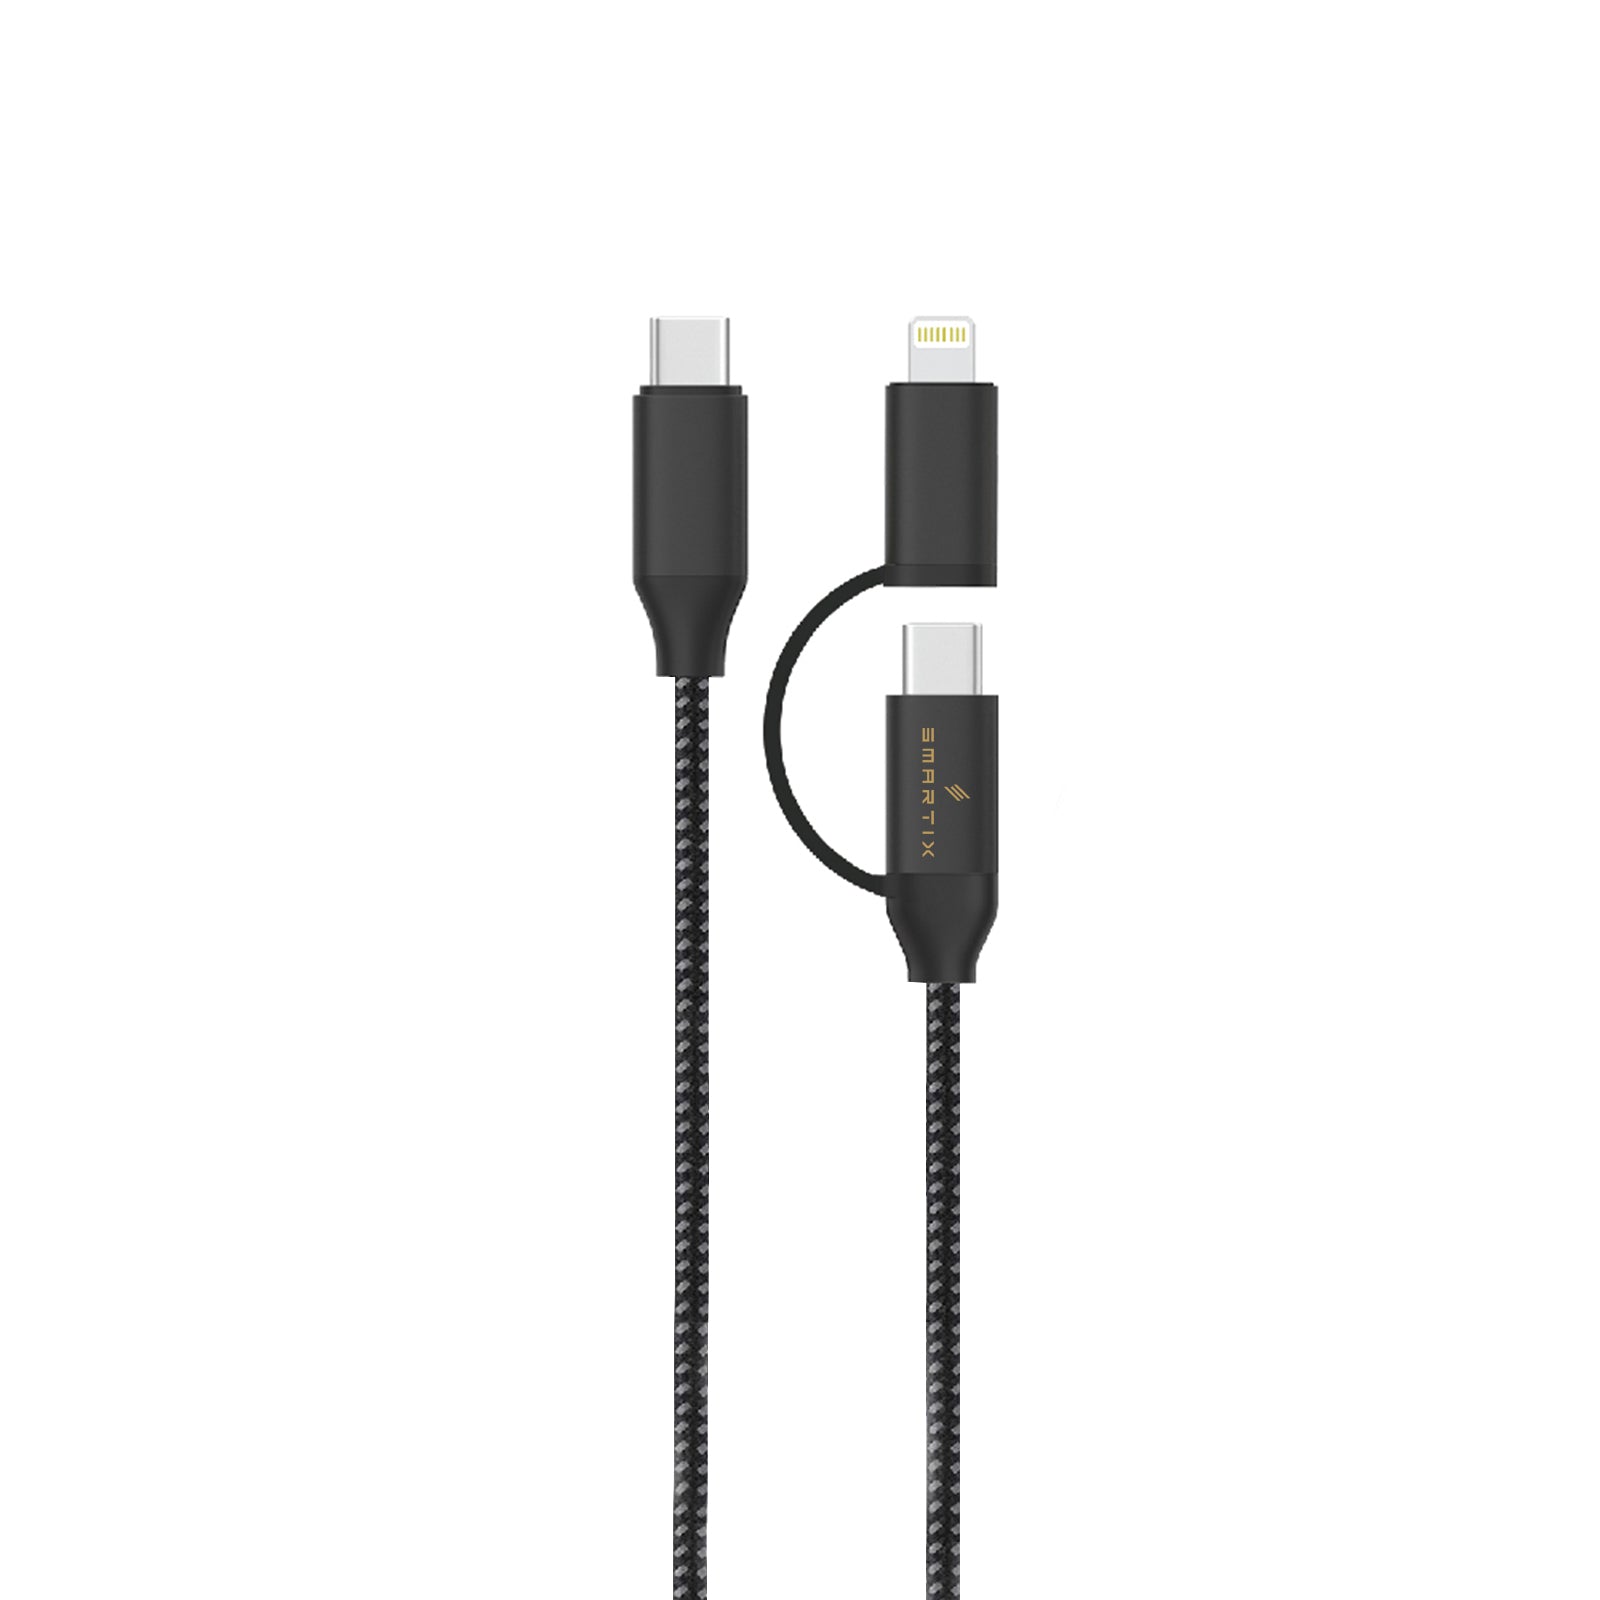 60W 2 in 1 Cable - Smart Infocomm